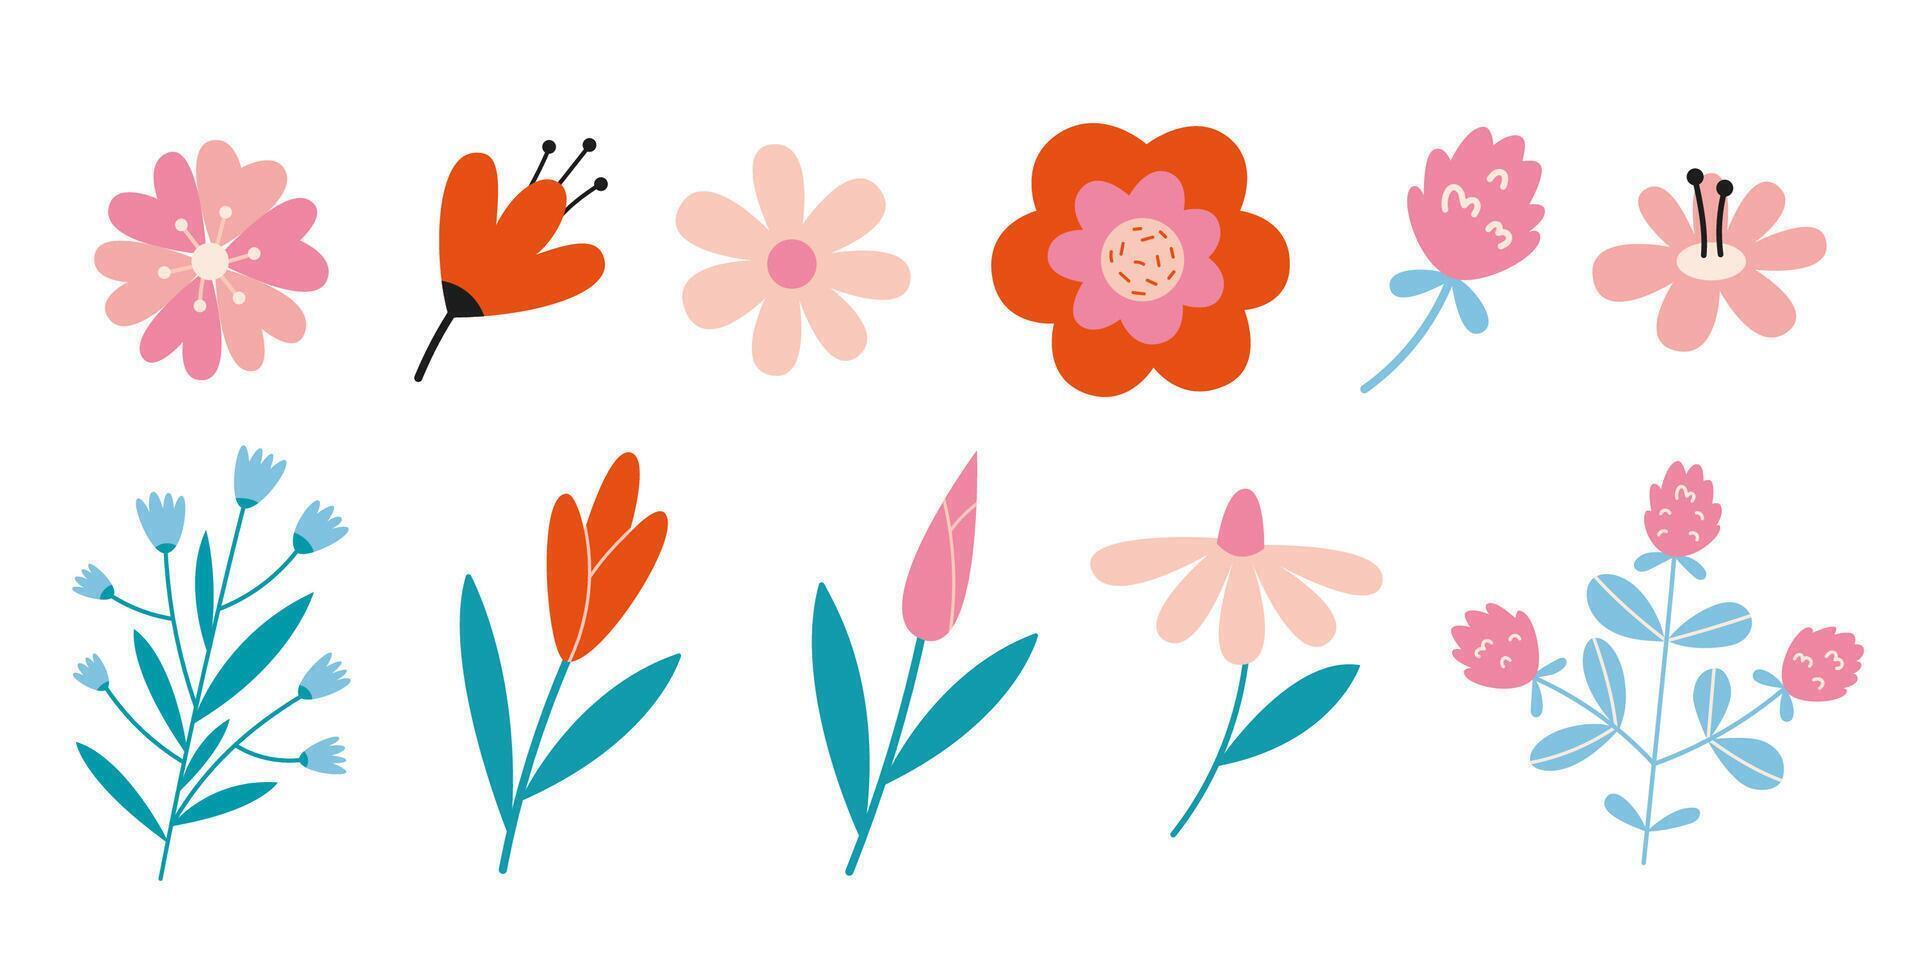 Set with meadow flowers, cartoon style. Trendy modern vector illustration isolated on white background, hand drawn, flat